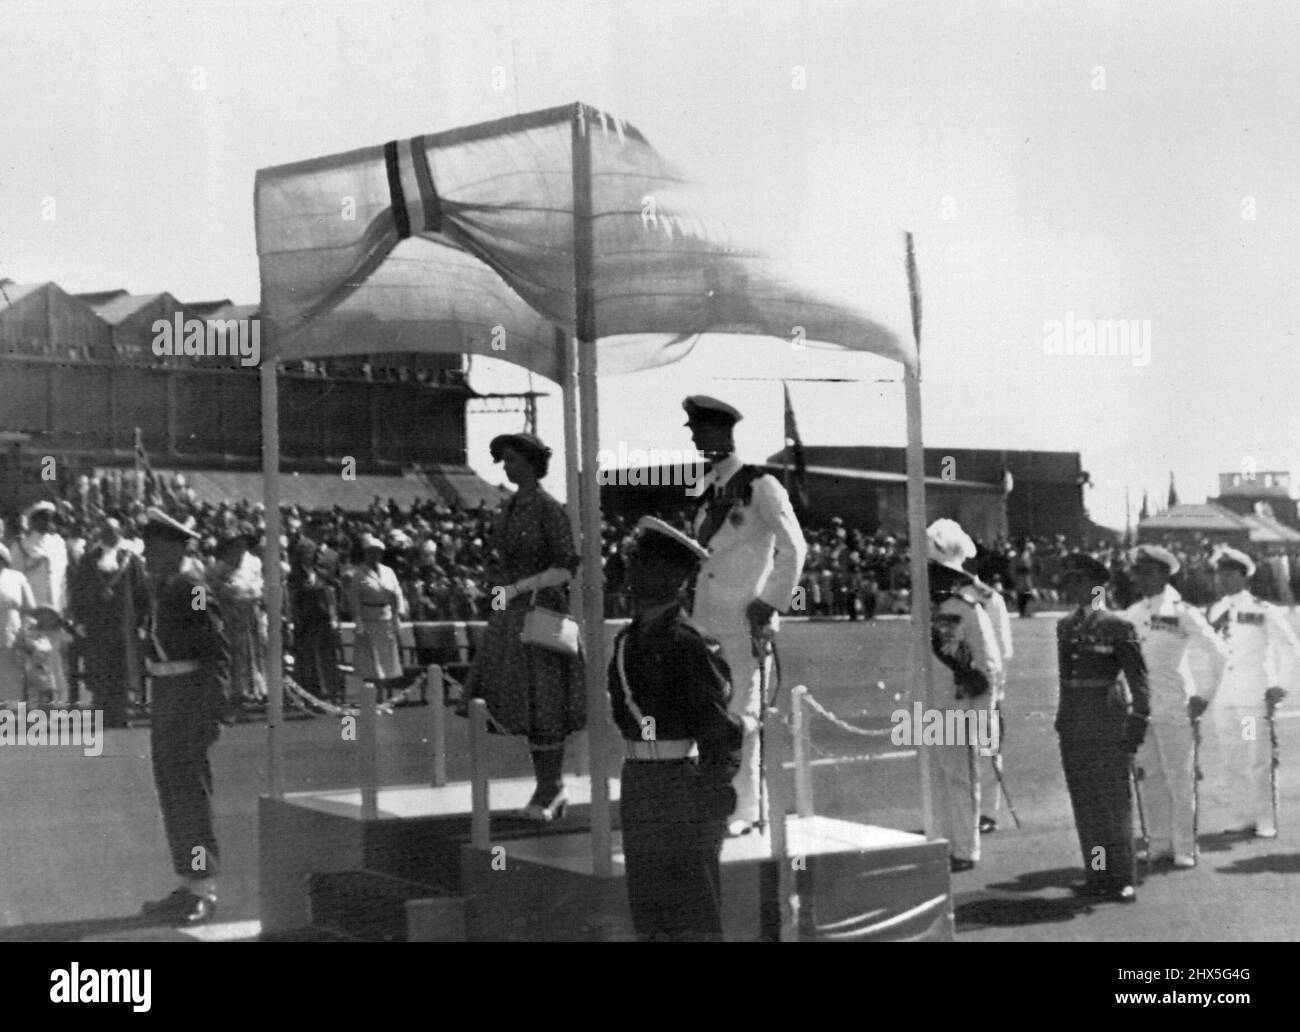 Princes And Duke Arrive In Nairobi -- Princess Elizabeth and the Duke of Edinburgh, wearing a white uniform, stand to attention during the National Anthem on their arrival at Eastleigh airport, Nairobi. Their Argonaut aircraft landed exactly on Schedule. They were met by the Governor of Kenya, Sir Philip Mitchell, and representatives of the Army, Navy and Air force. The Royal Couple are to be the guests of Sir Philip and Lady Mitchell during their stay in Nairobi. February 01, 1952. Stock Photo